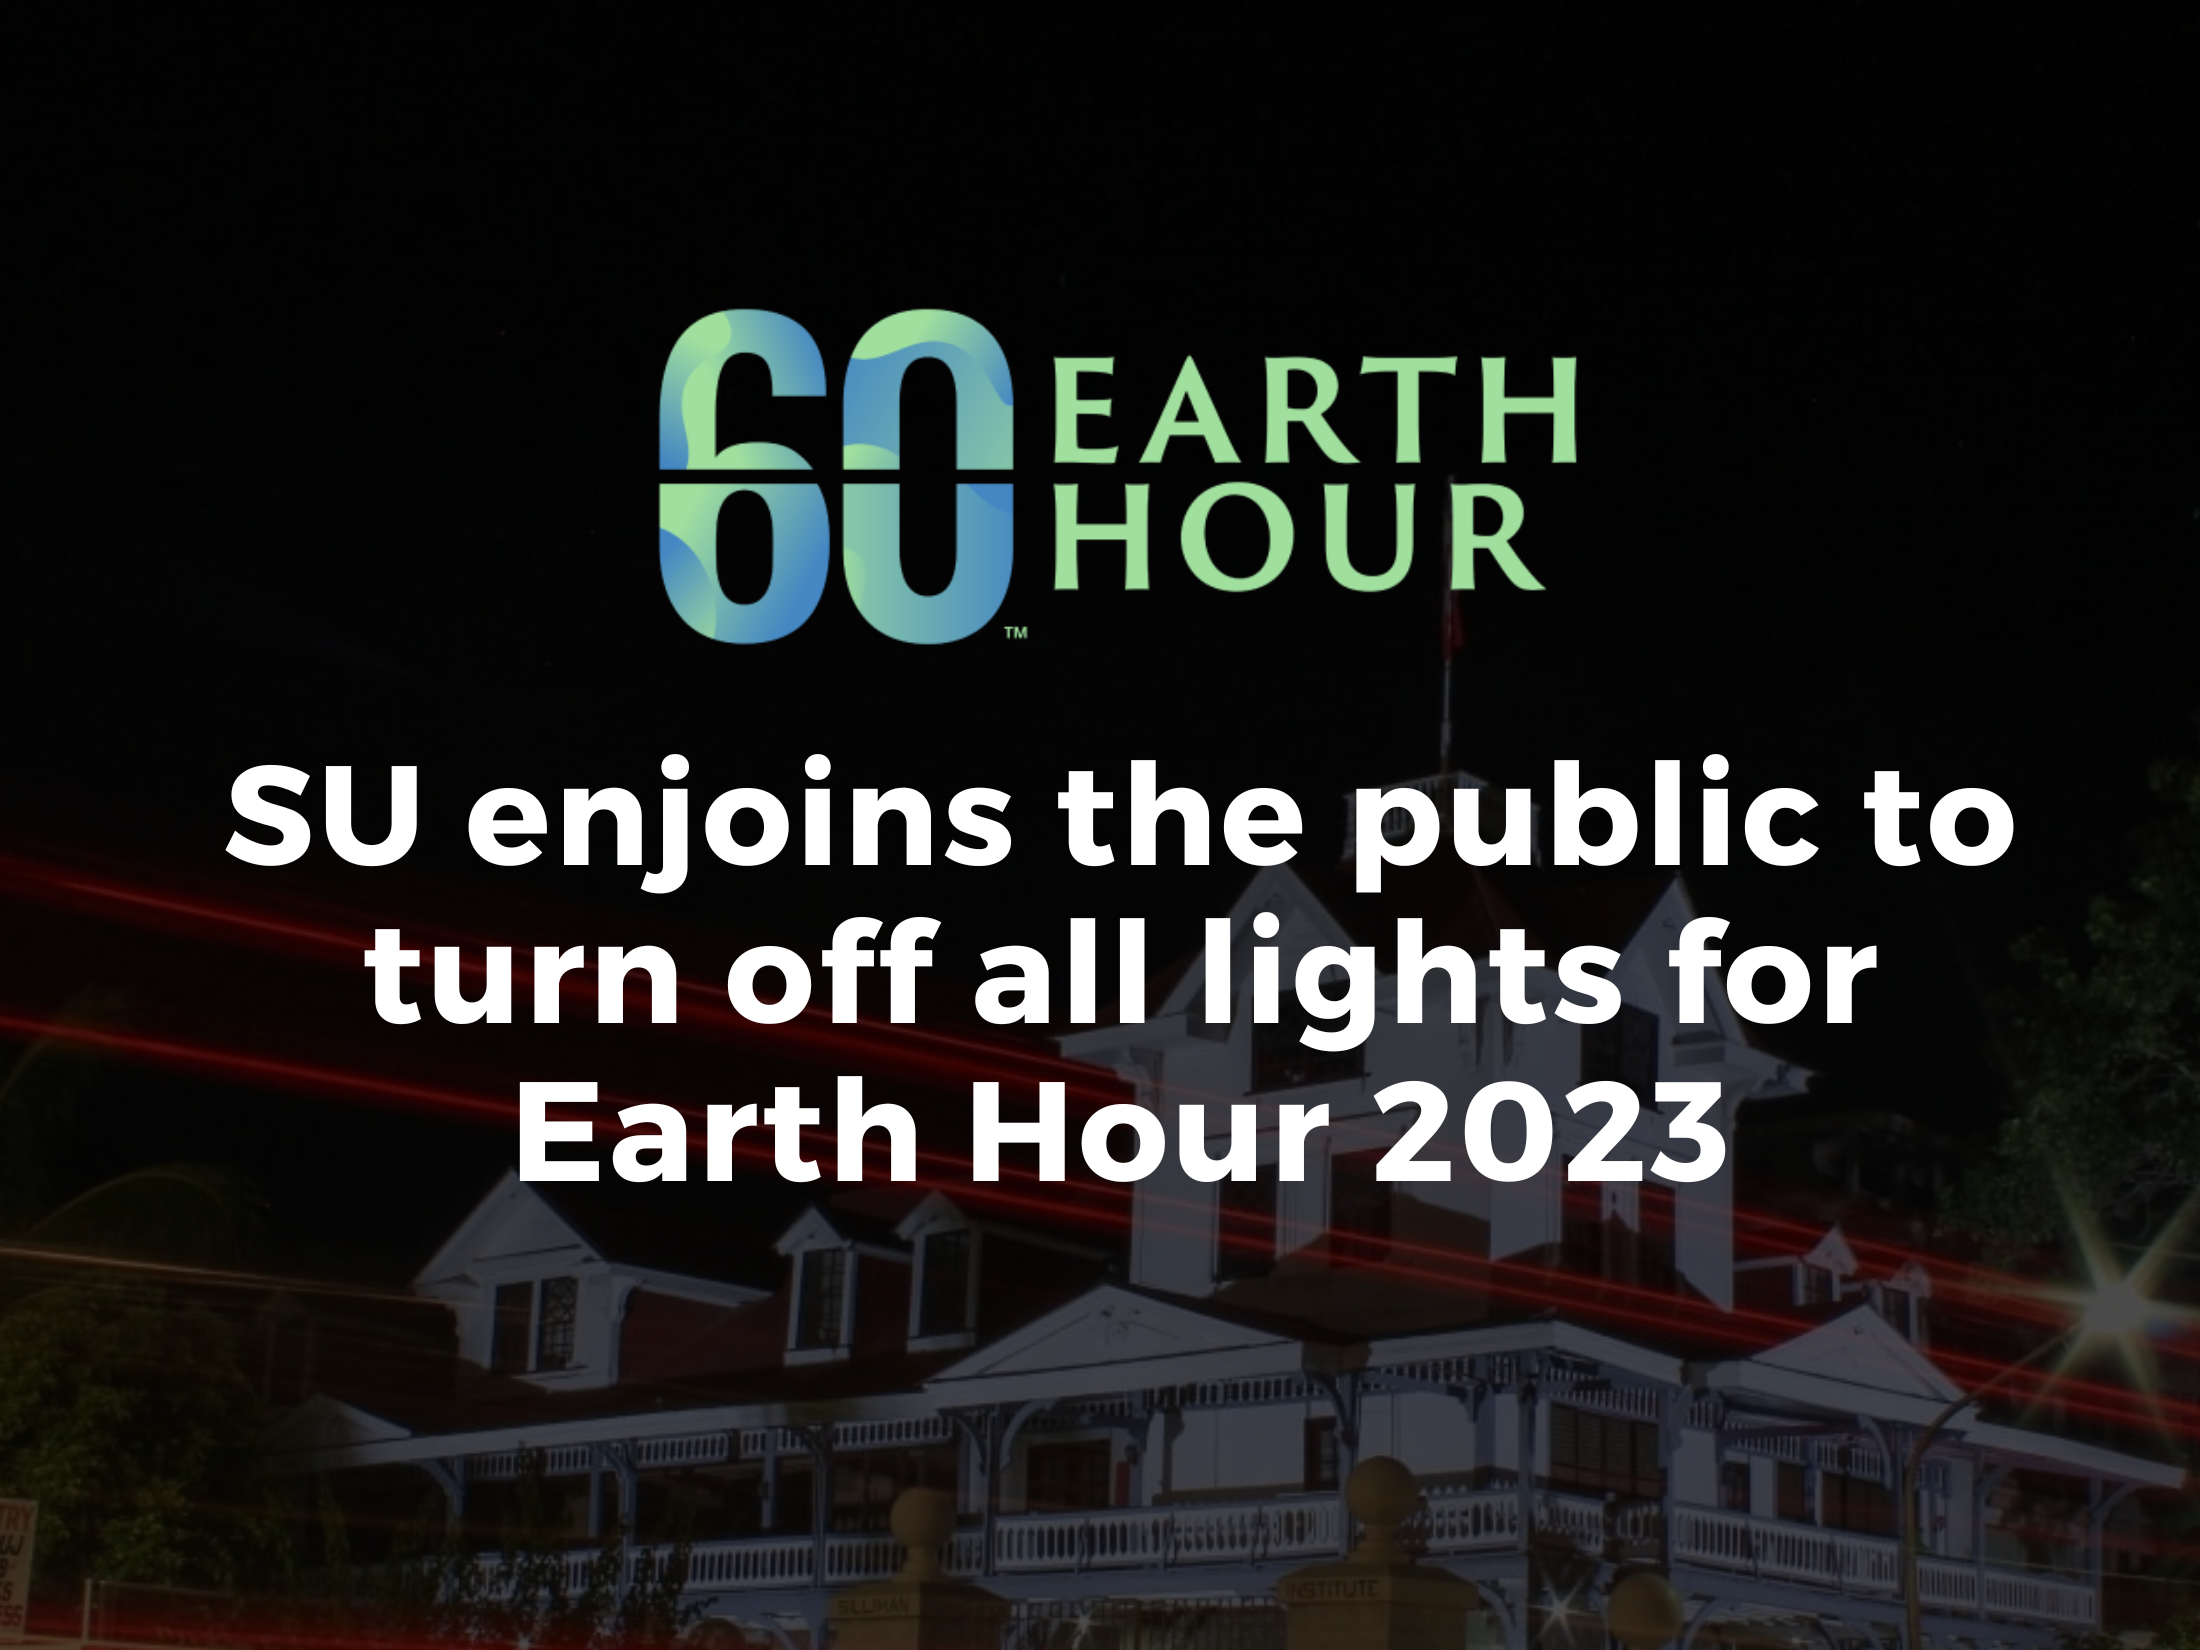 SU enjoins the public to turn off all lights for Earth Hour 2023